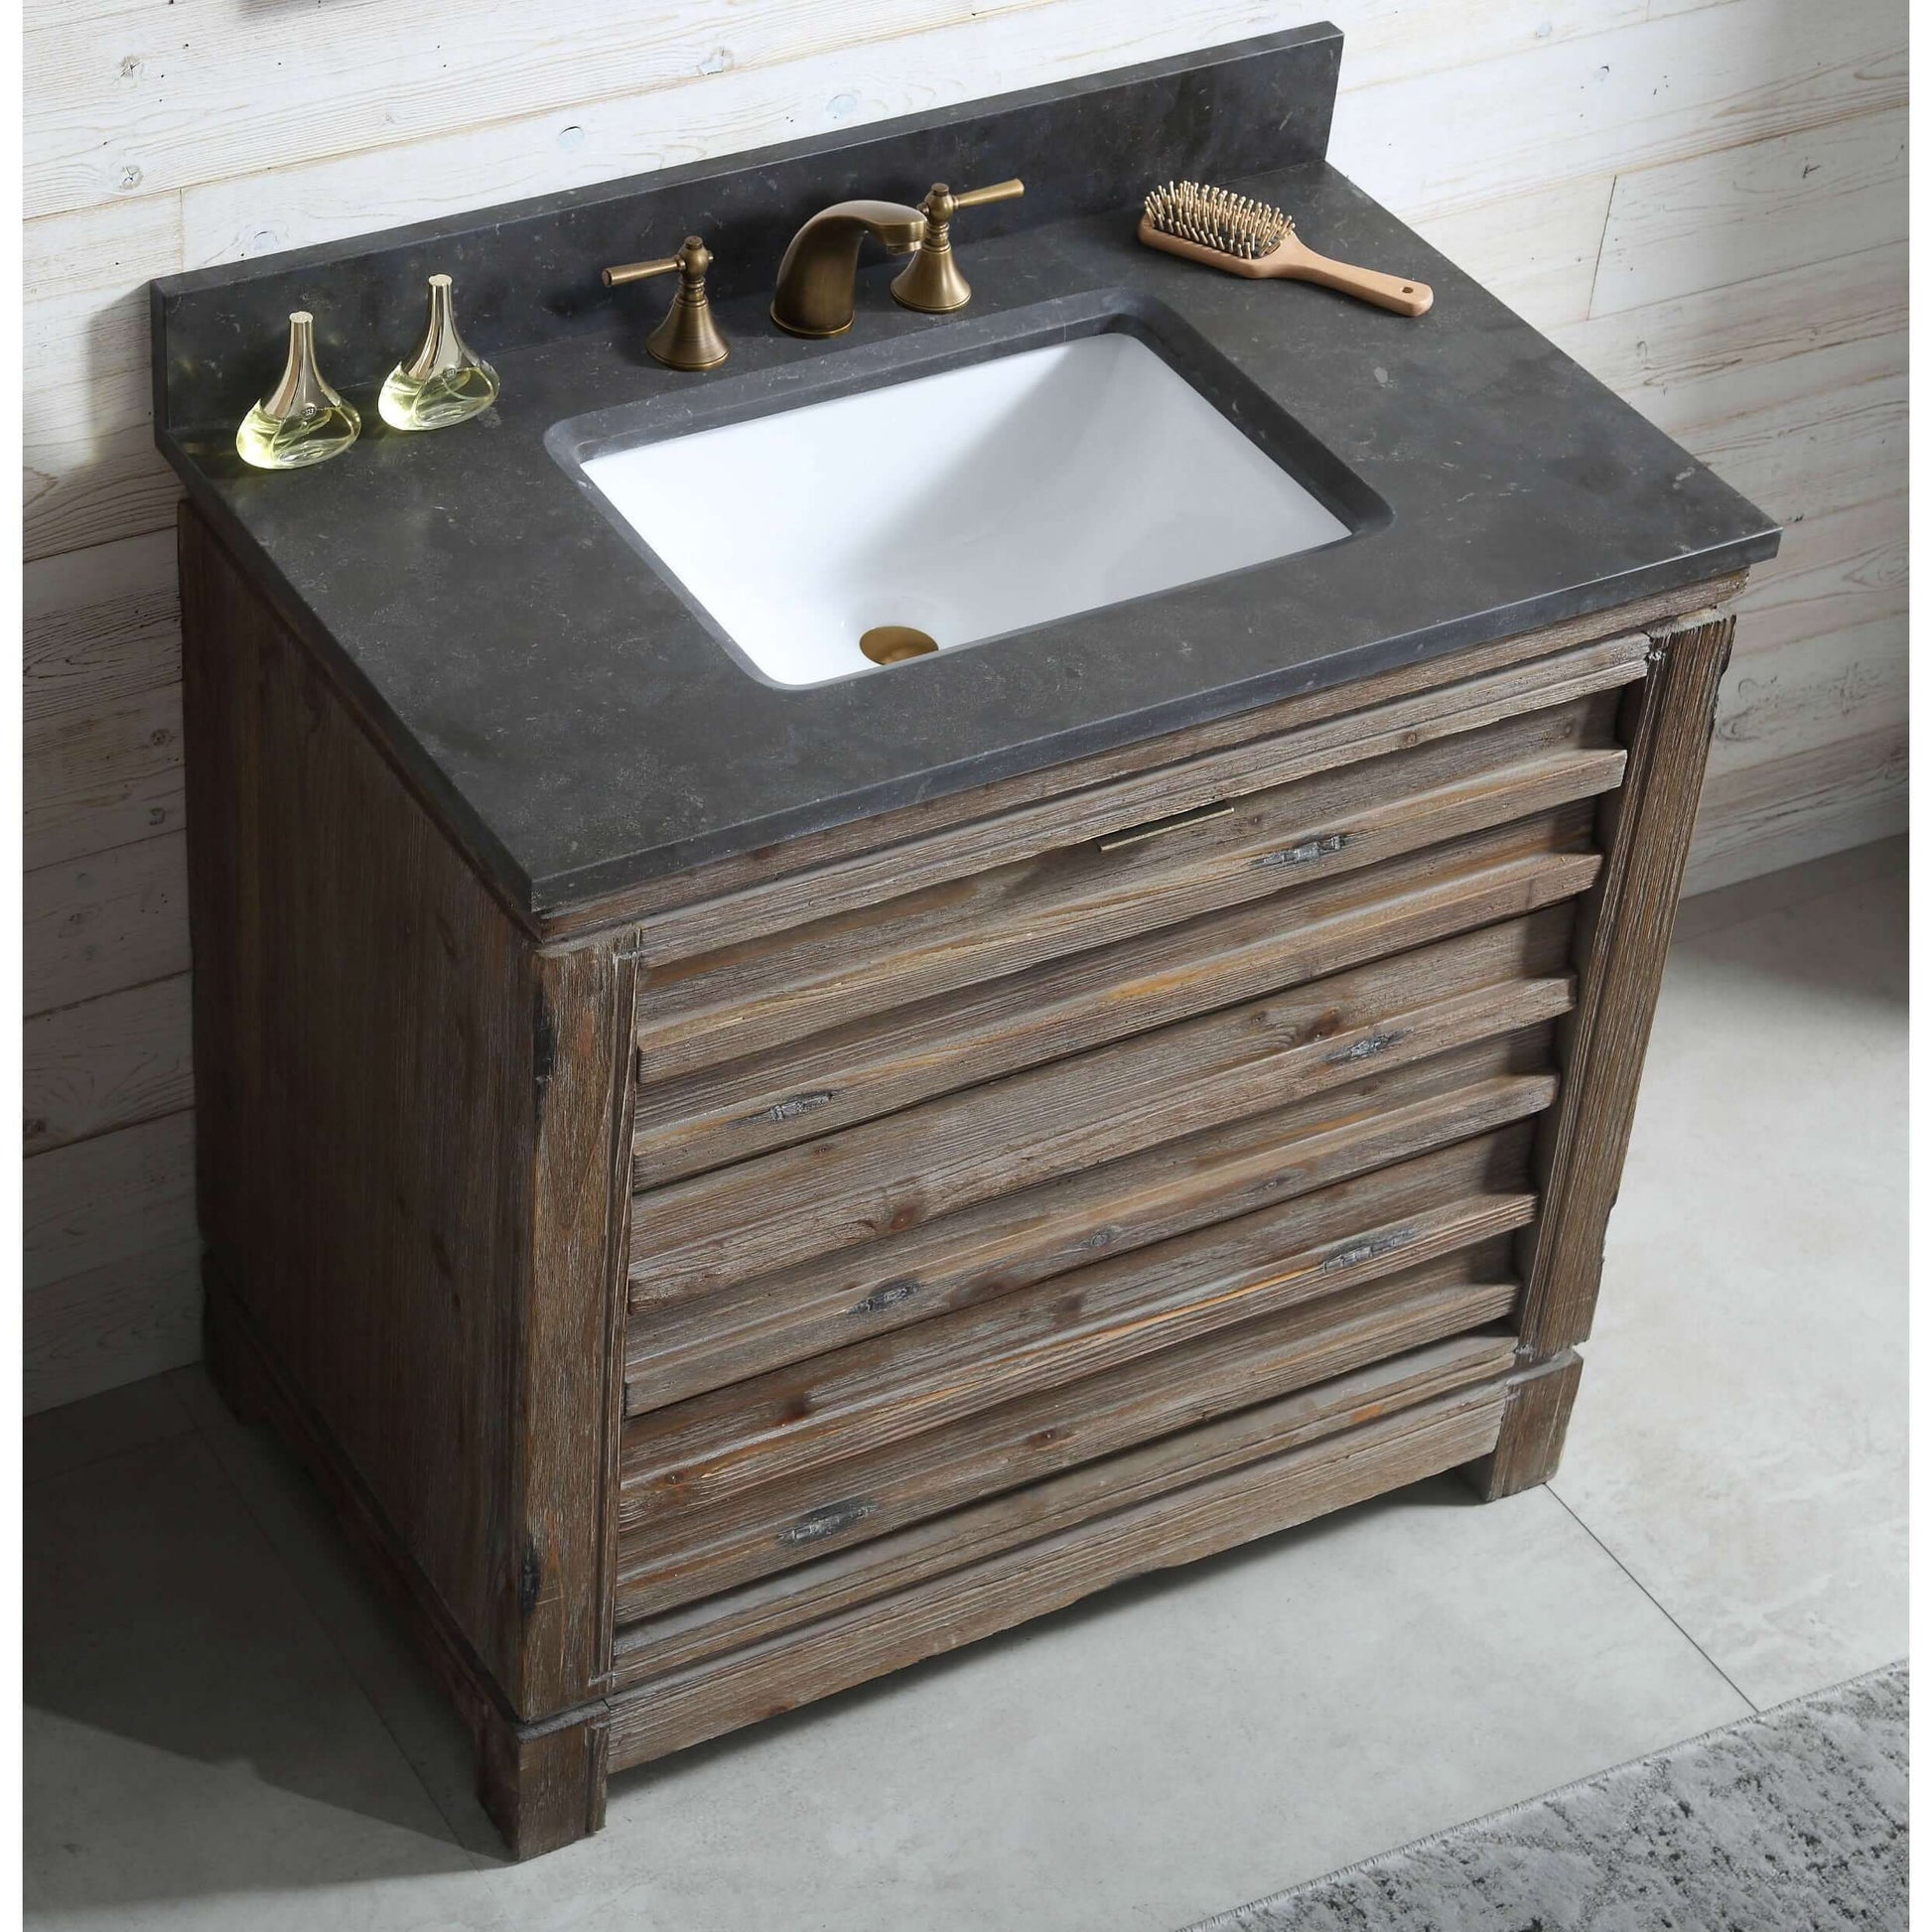 36" Wood Sink Vanity Match With Marble Top -No Faucet - WH8436